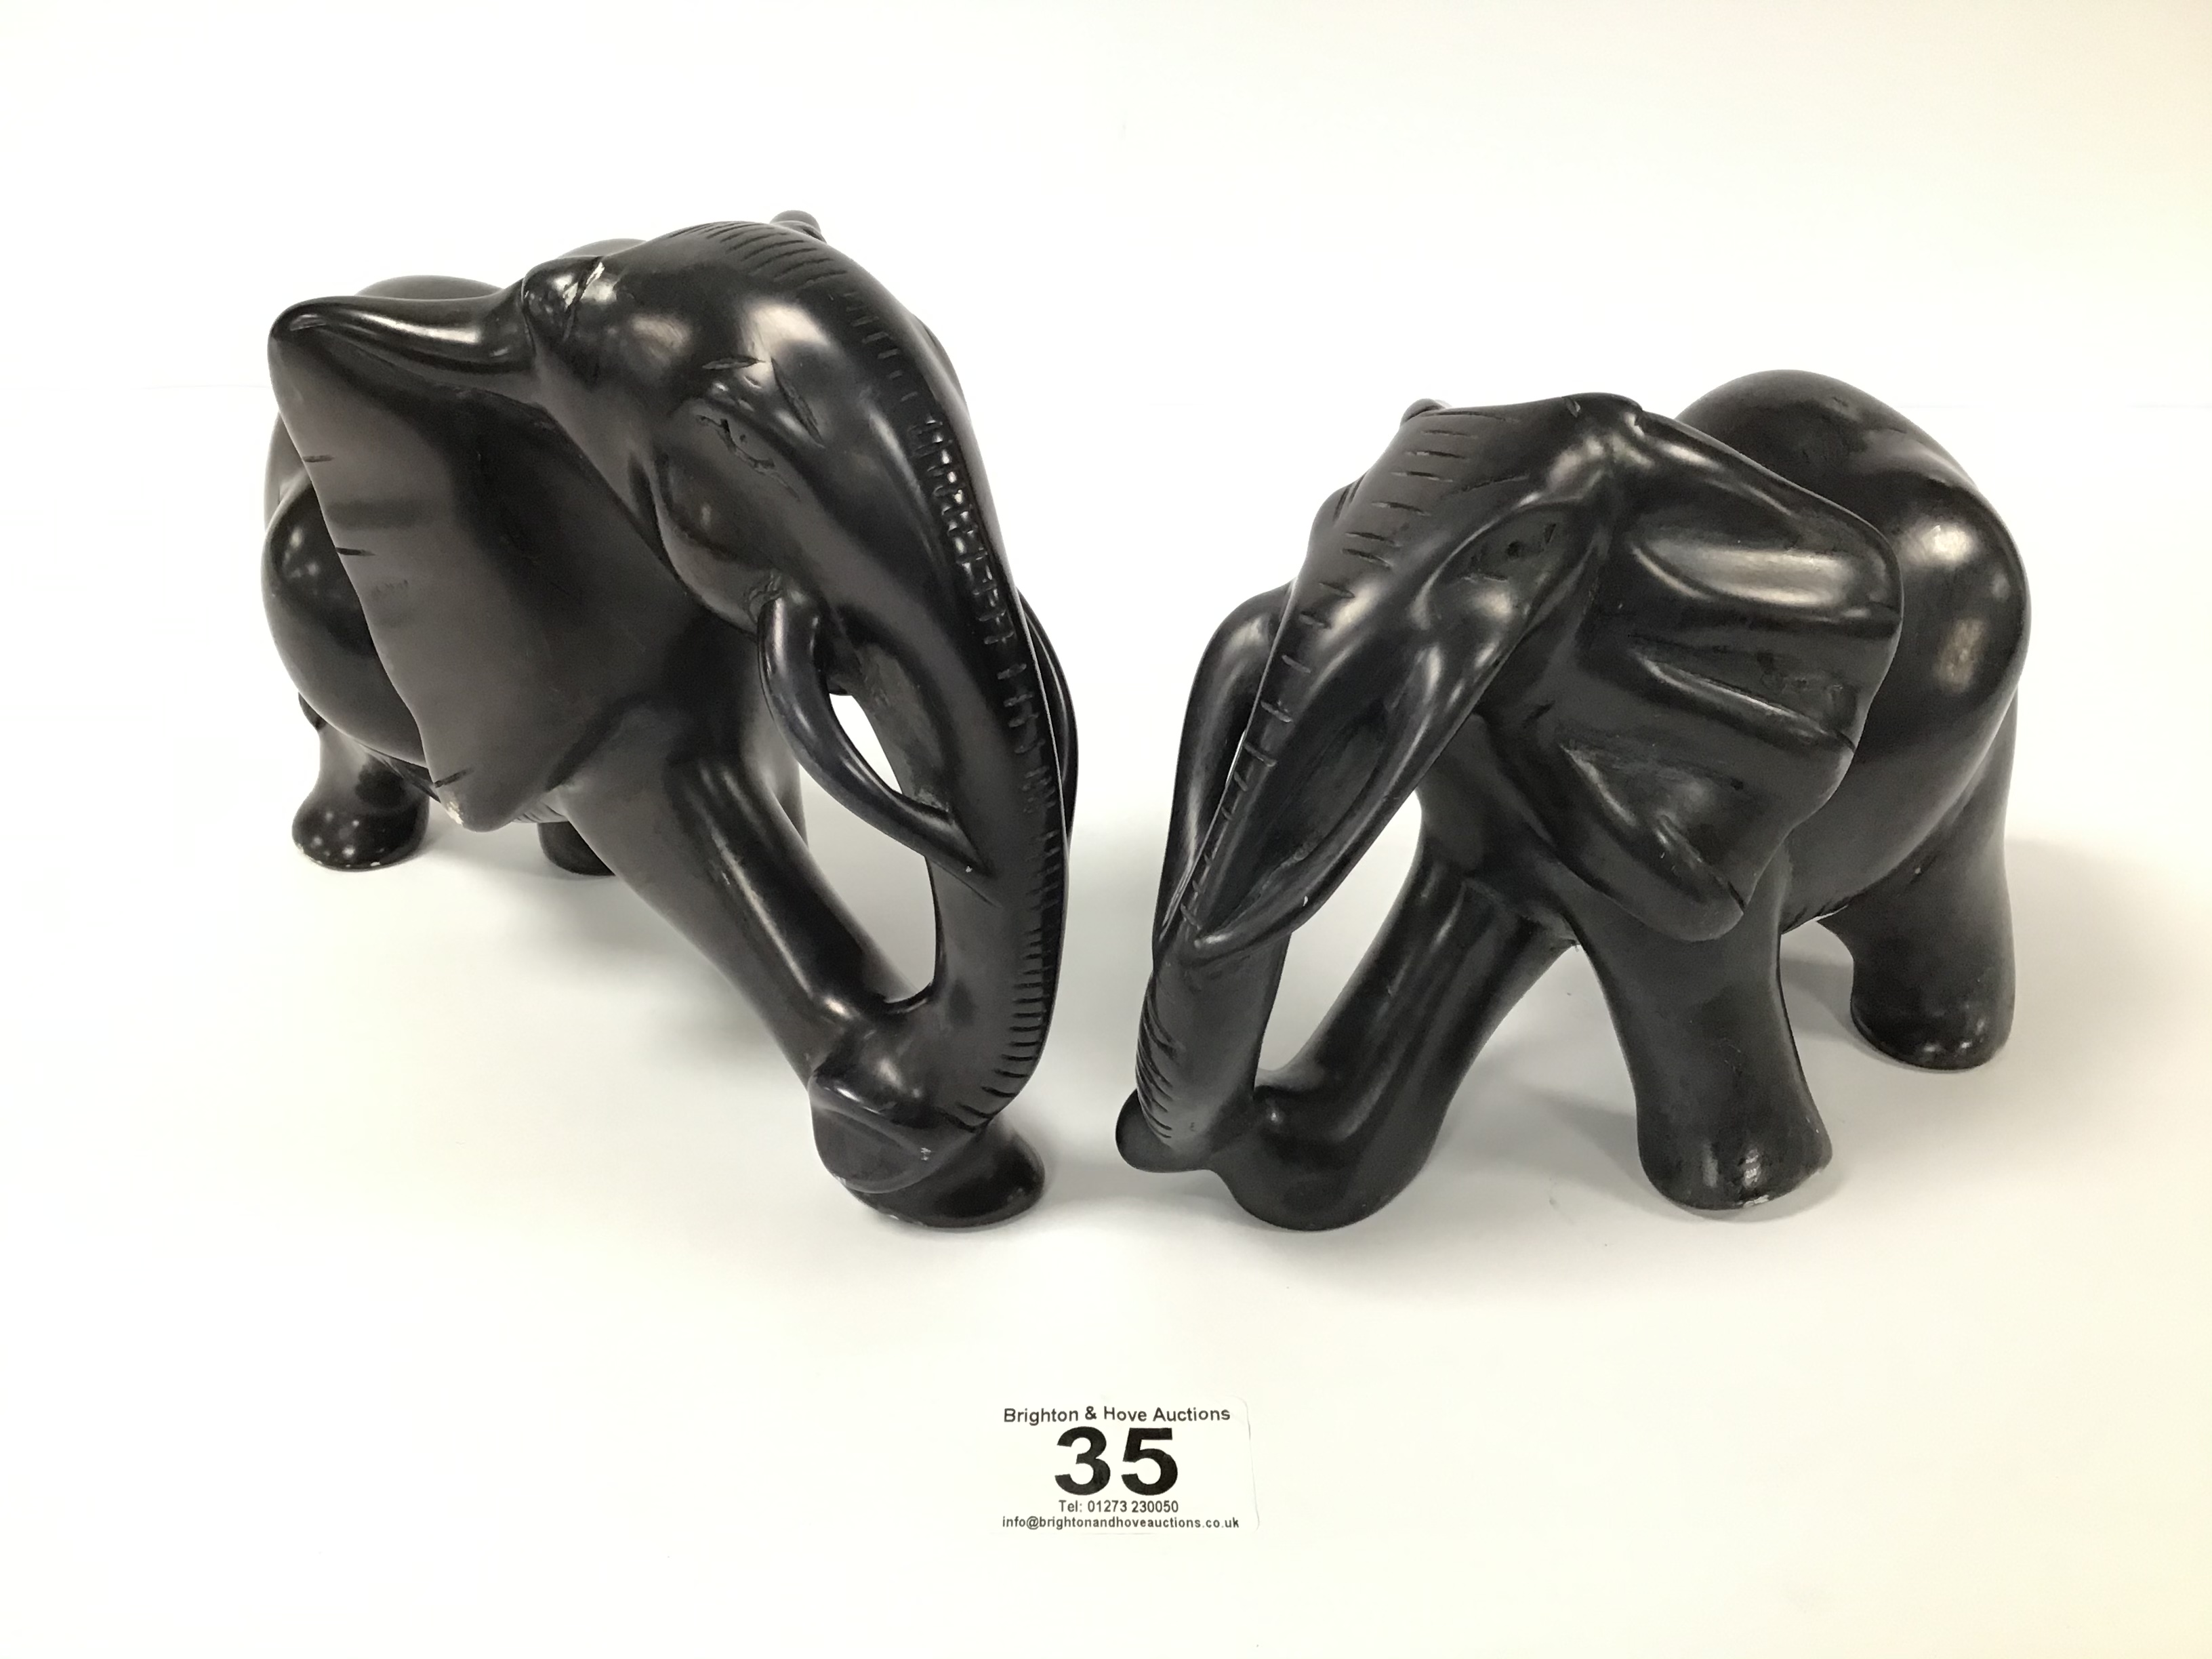 TWO CARVED HEAVY AFRICAN STONE FIGURES OF ELEPHANTS BY BESMO, LARGEST 23CM WIDE - Image 4 of 6